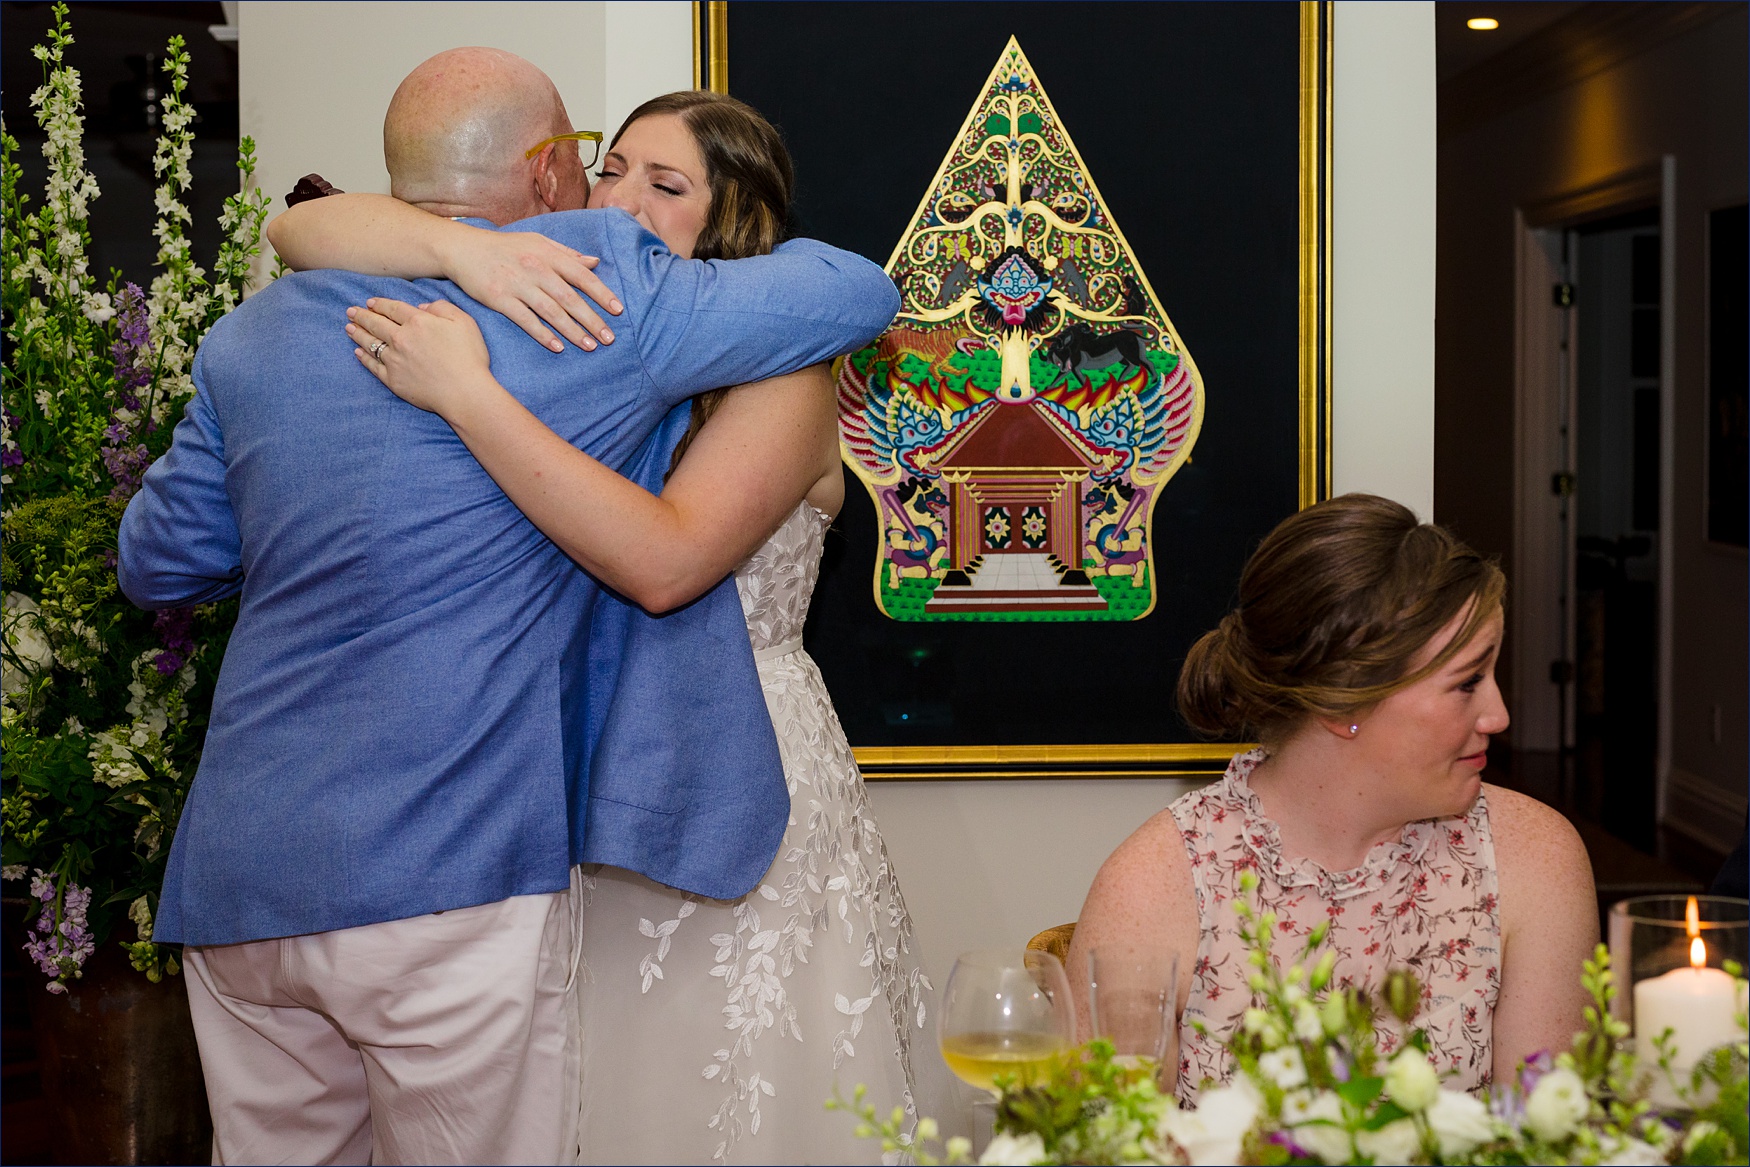 The bride tearfully hugs her father after his song